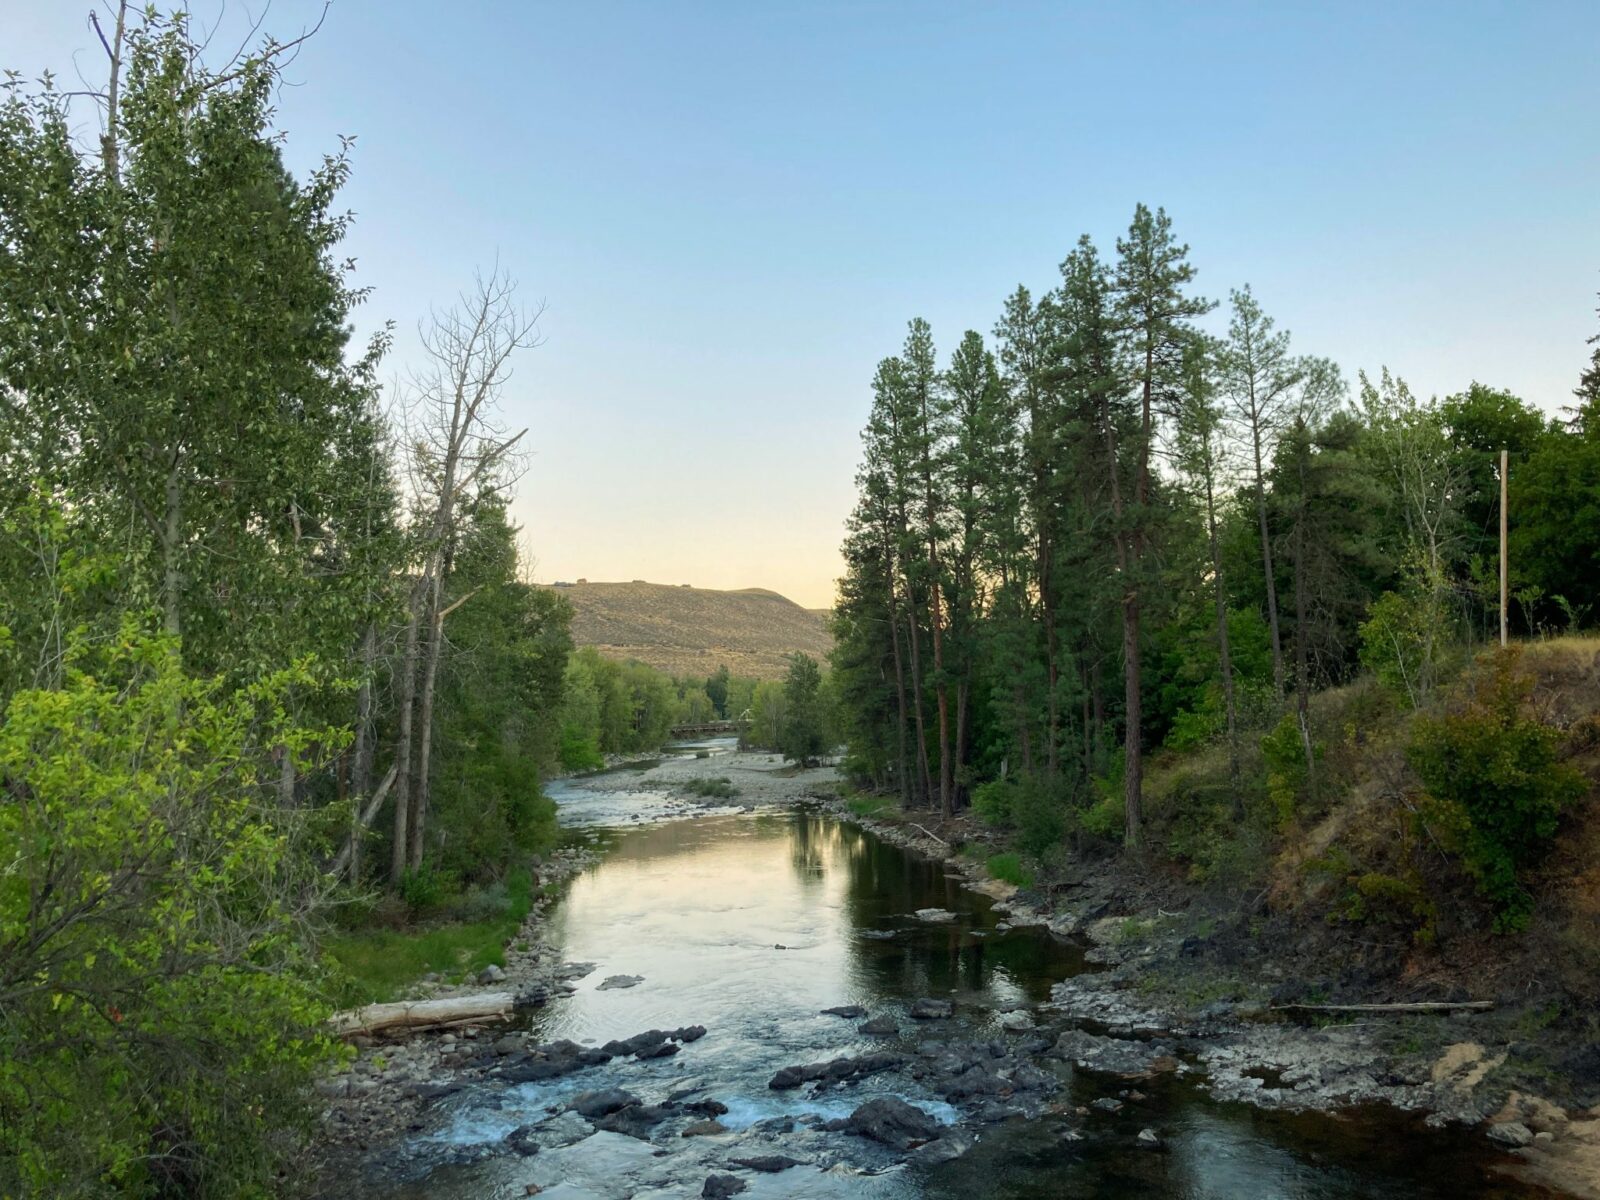 A peaceful river with trees on each side at dusk in the town of Winthrop, Washington. In the distance is a dry brown hill.